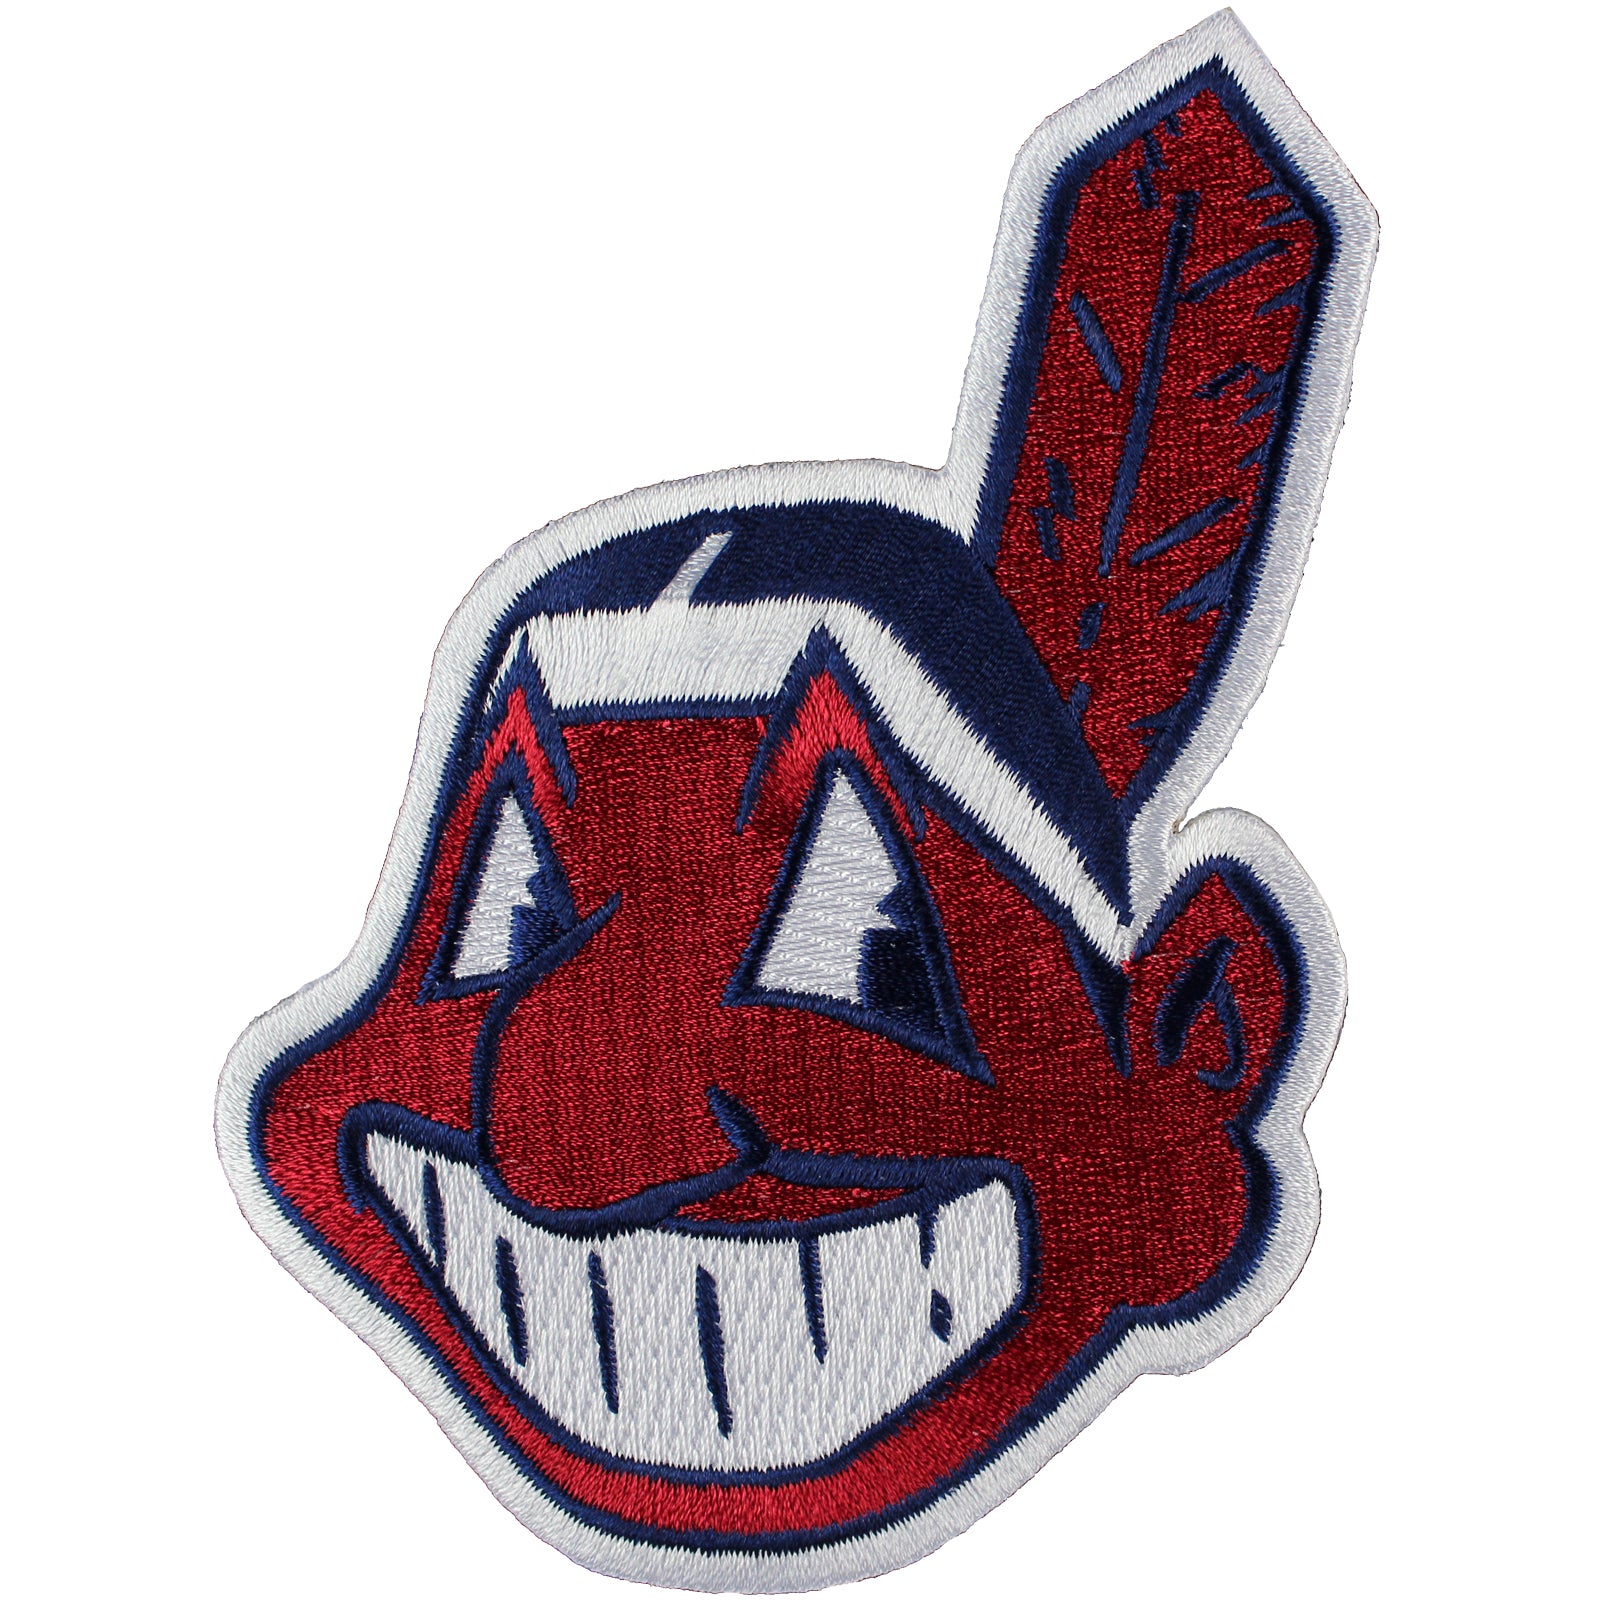 the chief cleveland indians